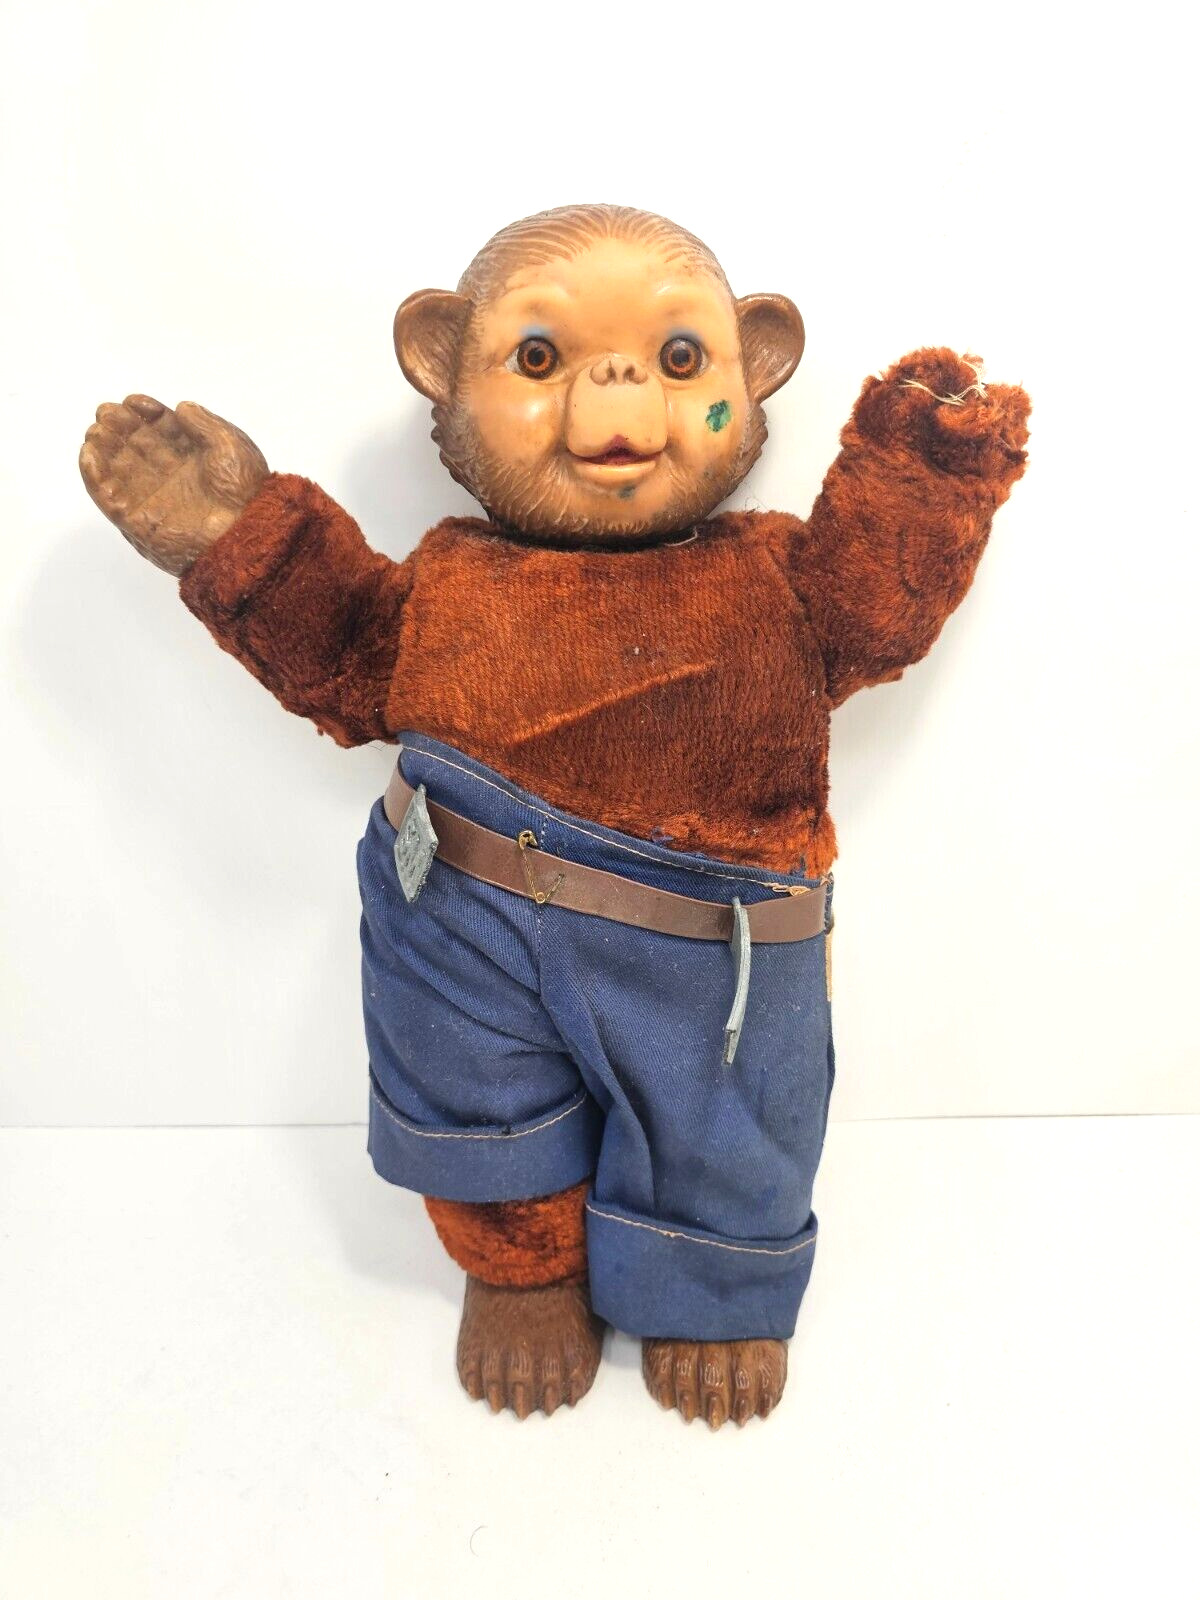 Vintage 1950s Smokey the Bear Rubber Face 16’’ Ideal Toy Plush Animal Doll